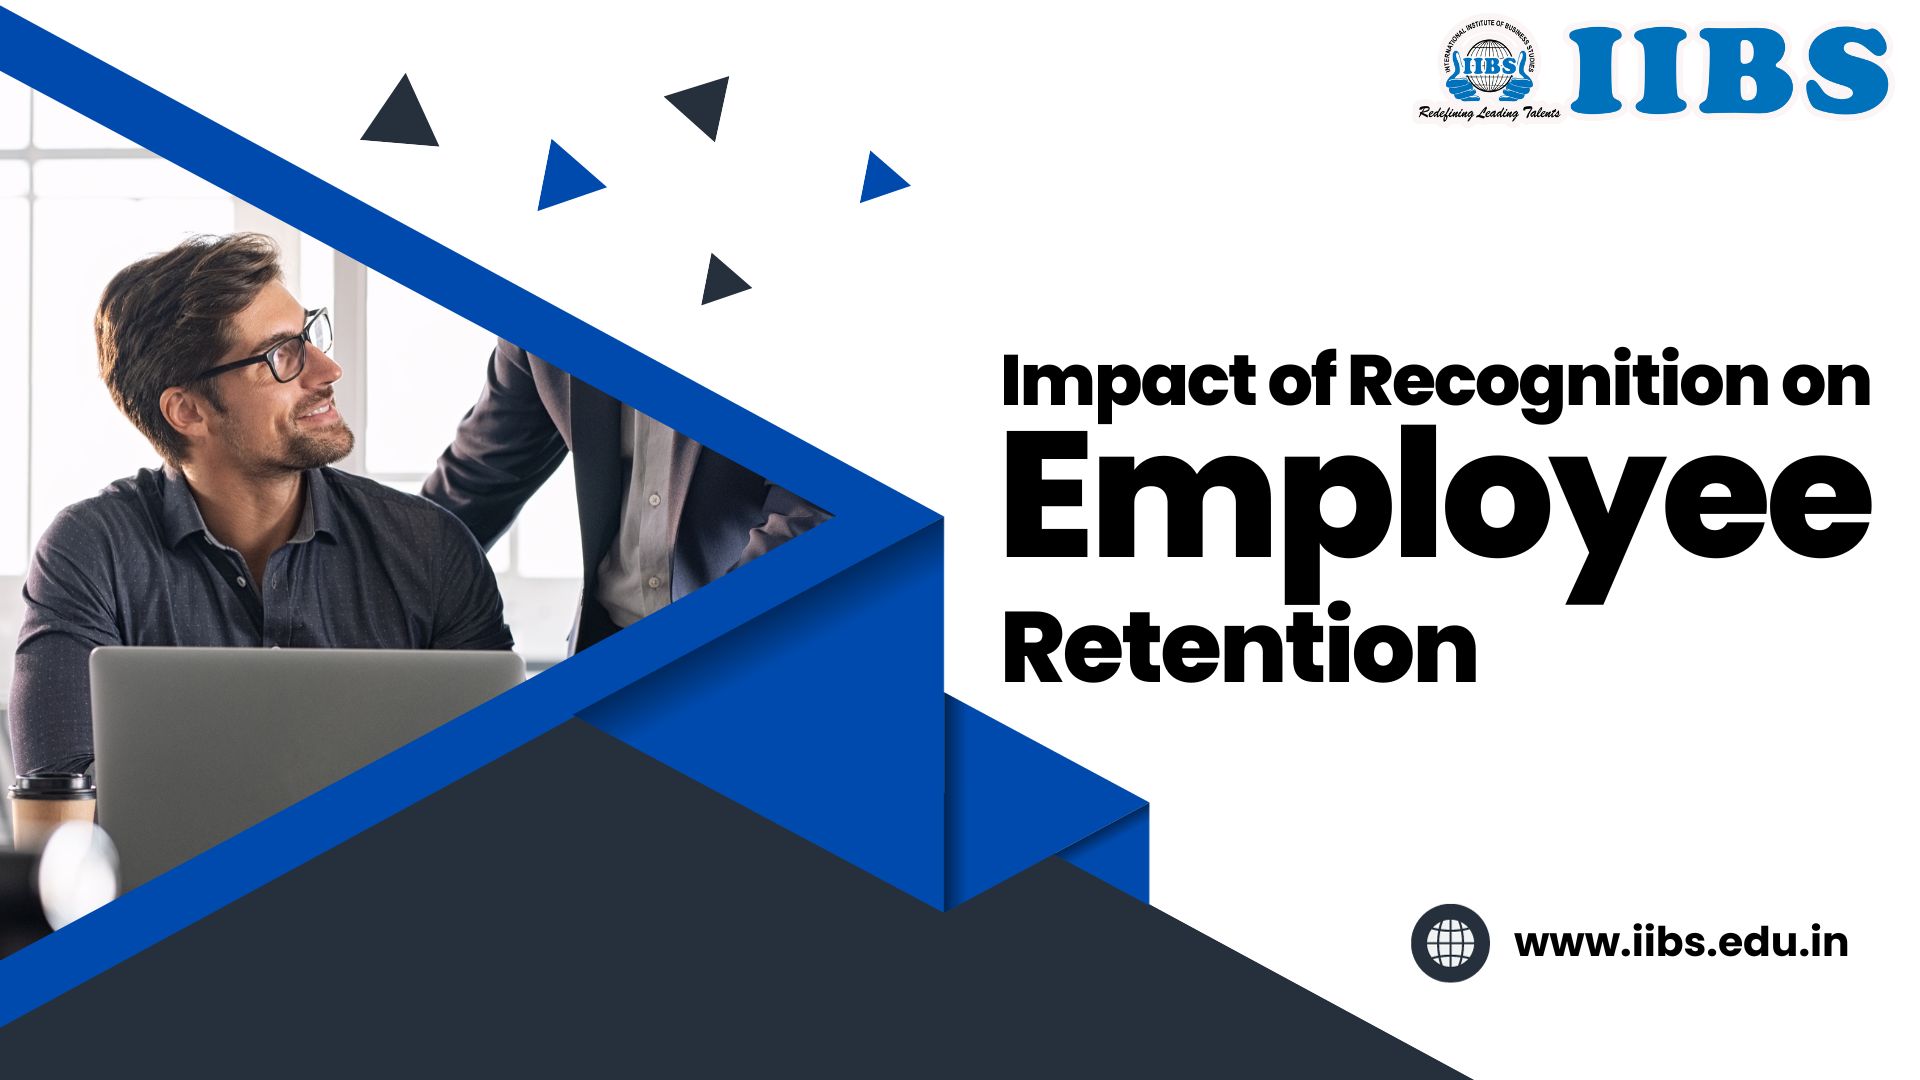 Research Article: Impact of Recognition on Employee Retention